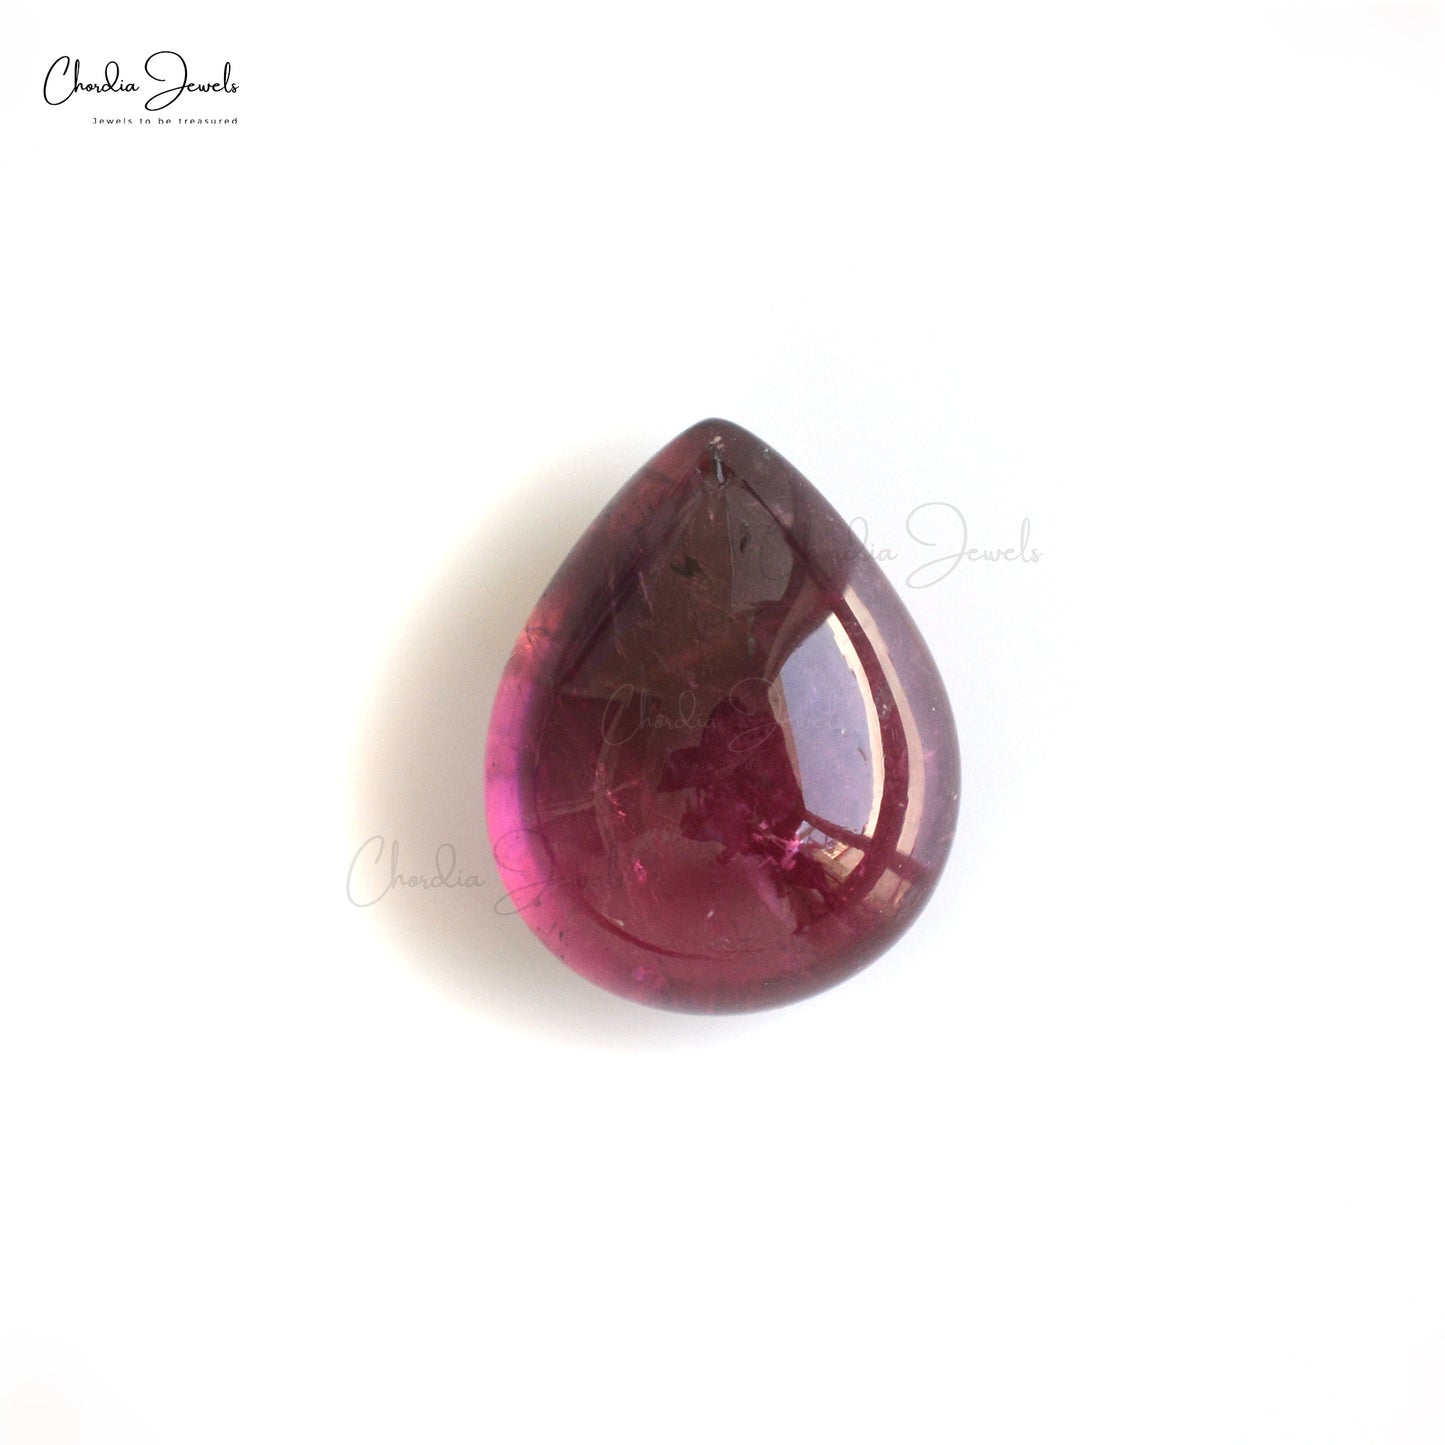 Load image into Gallery viewer, Genuine Pink Tourmaline Pear Cabochon 3.75 Carat Gemstone for Making Jewelry, 1 Piece
